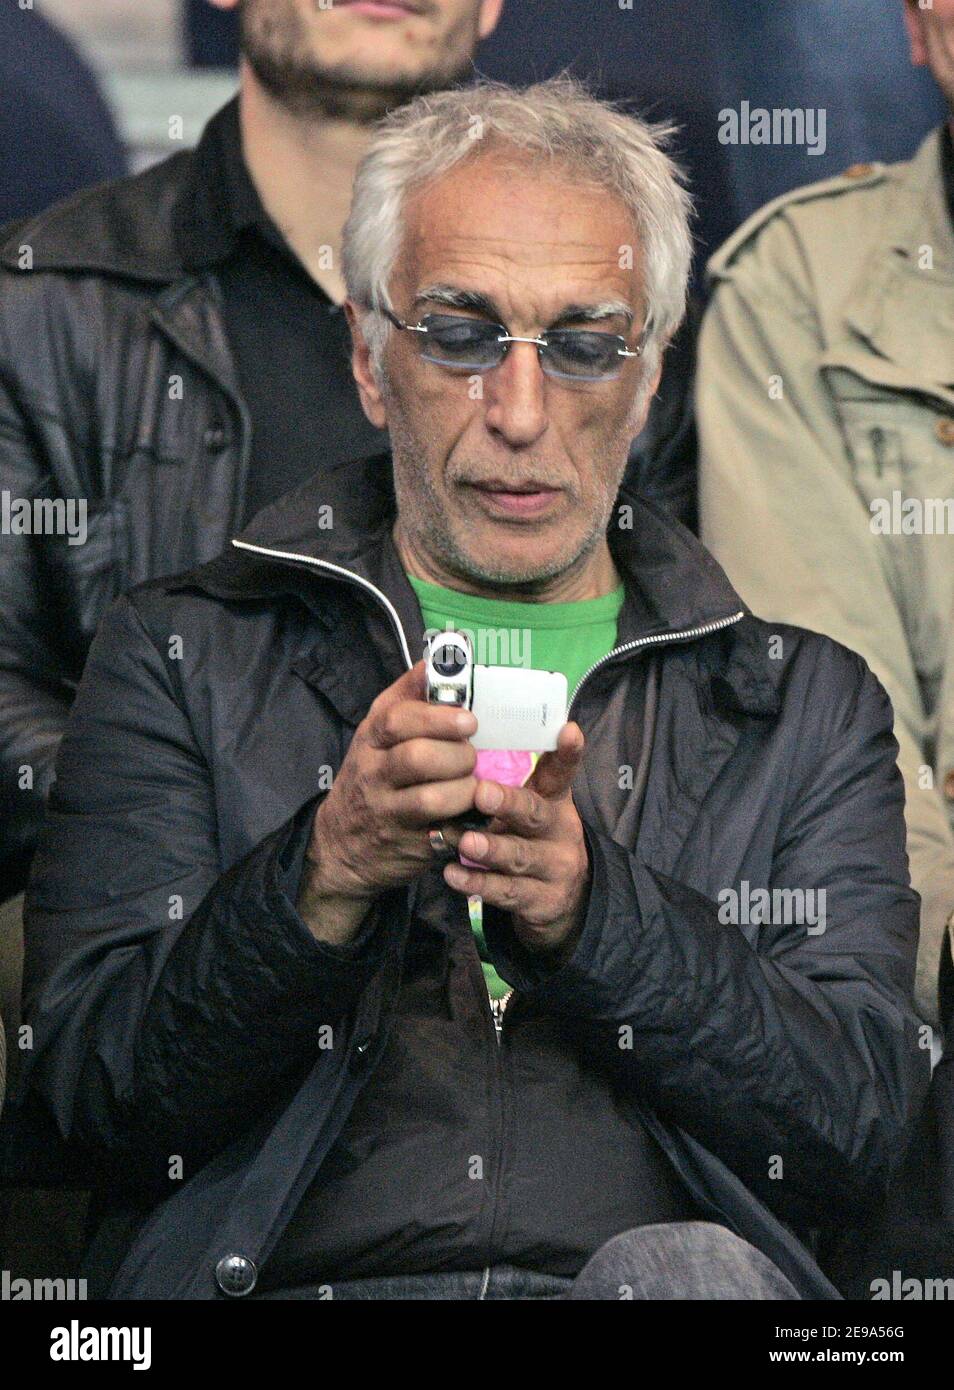 French actor Gerard Darmon attends the French first league football match Paris Saint-Germain vs Ajaccio at the Parc des Princes in Paris, France, on May 6, 2006. Ajaccio won 4-2. Photo by Laurent Zabulon/ABACAPRESS.COM Stock Photo